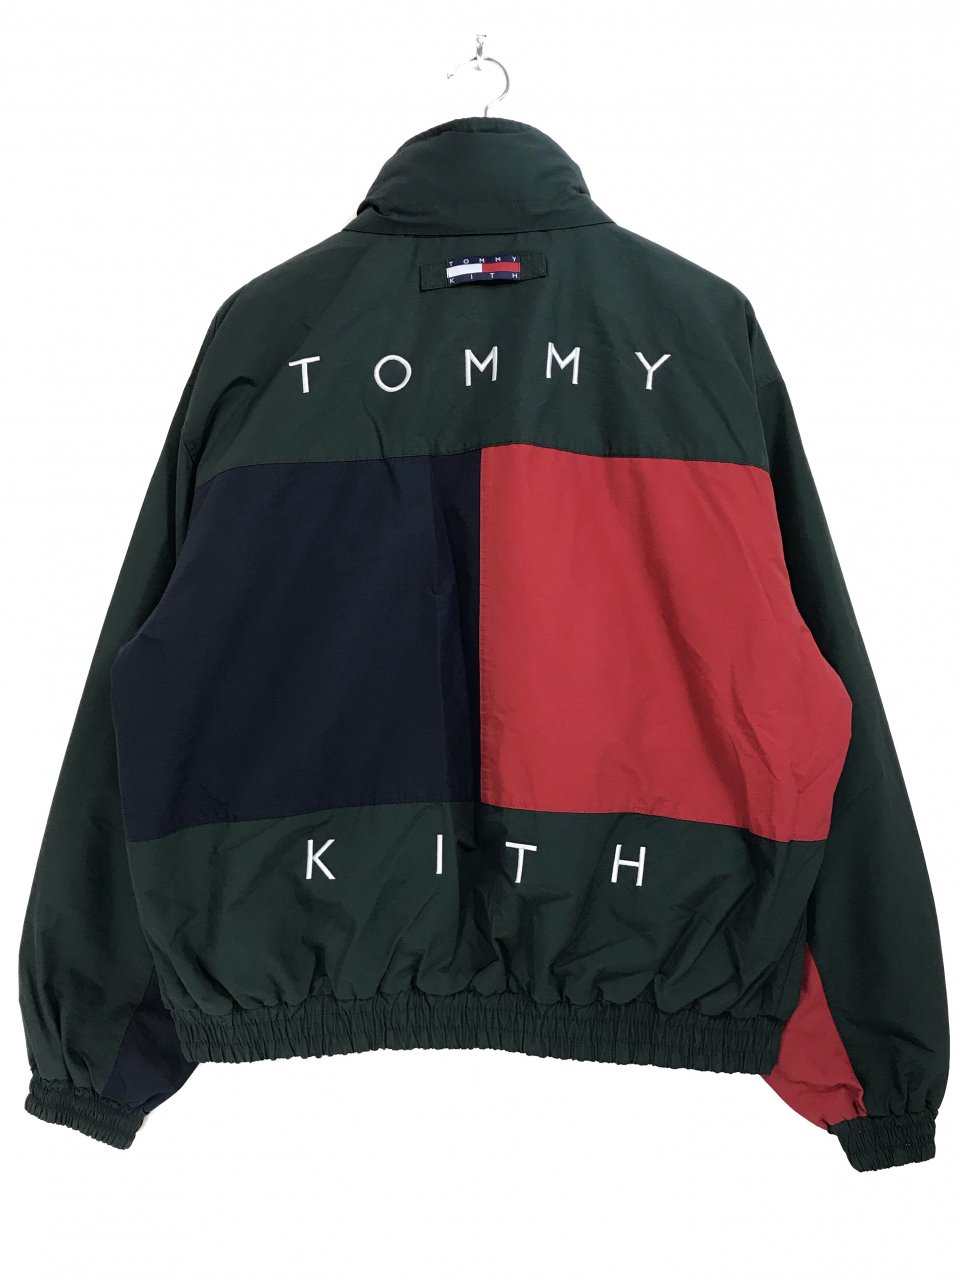 KITH × TOMMY HILFIGER REVERSIBLE COLOR BLOCK JACKET (FOREST) キース トミーヒルフィガー  リバーシブル ナイロンジャケット 深緑 コラボ - NEWJOKE ONLINE STORE